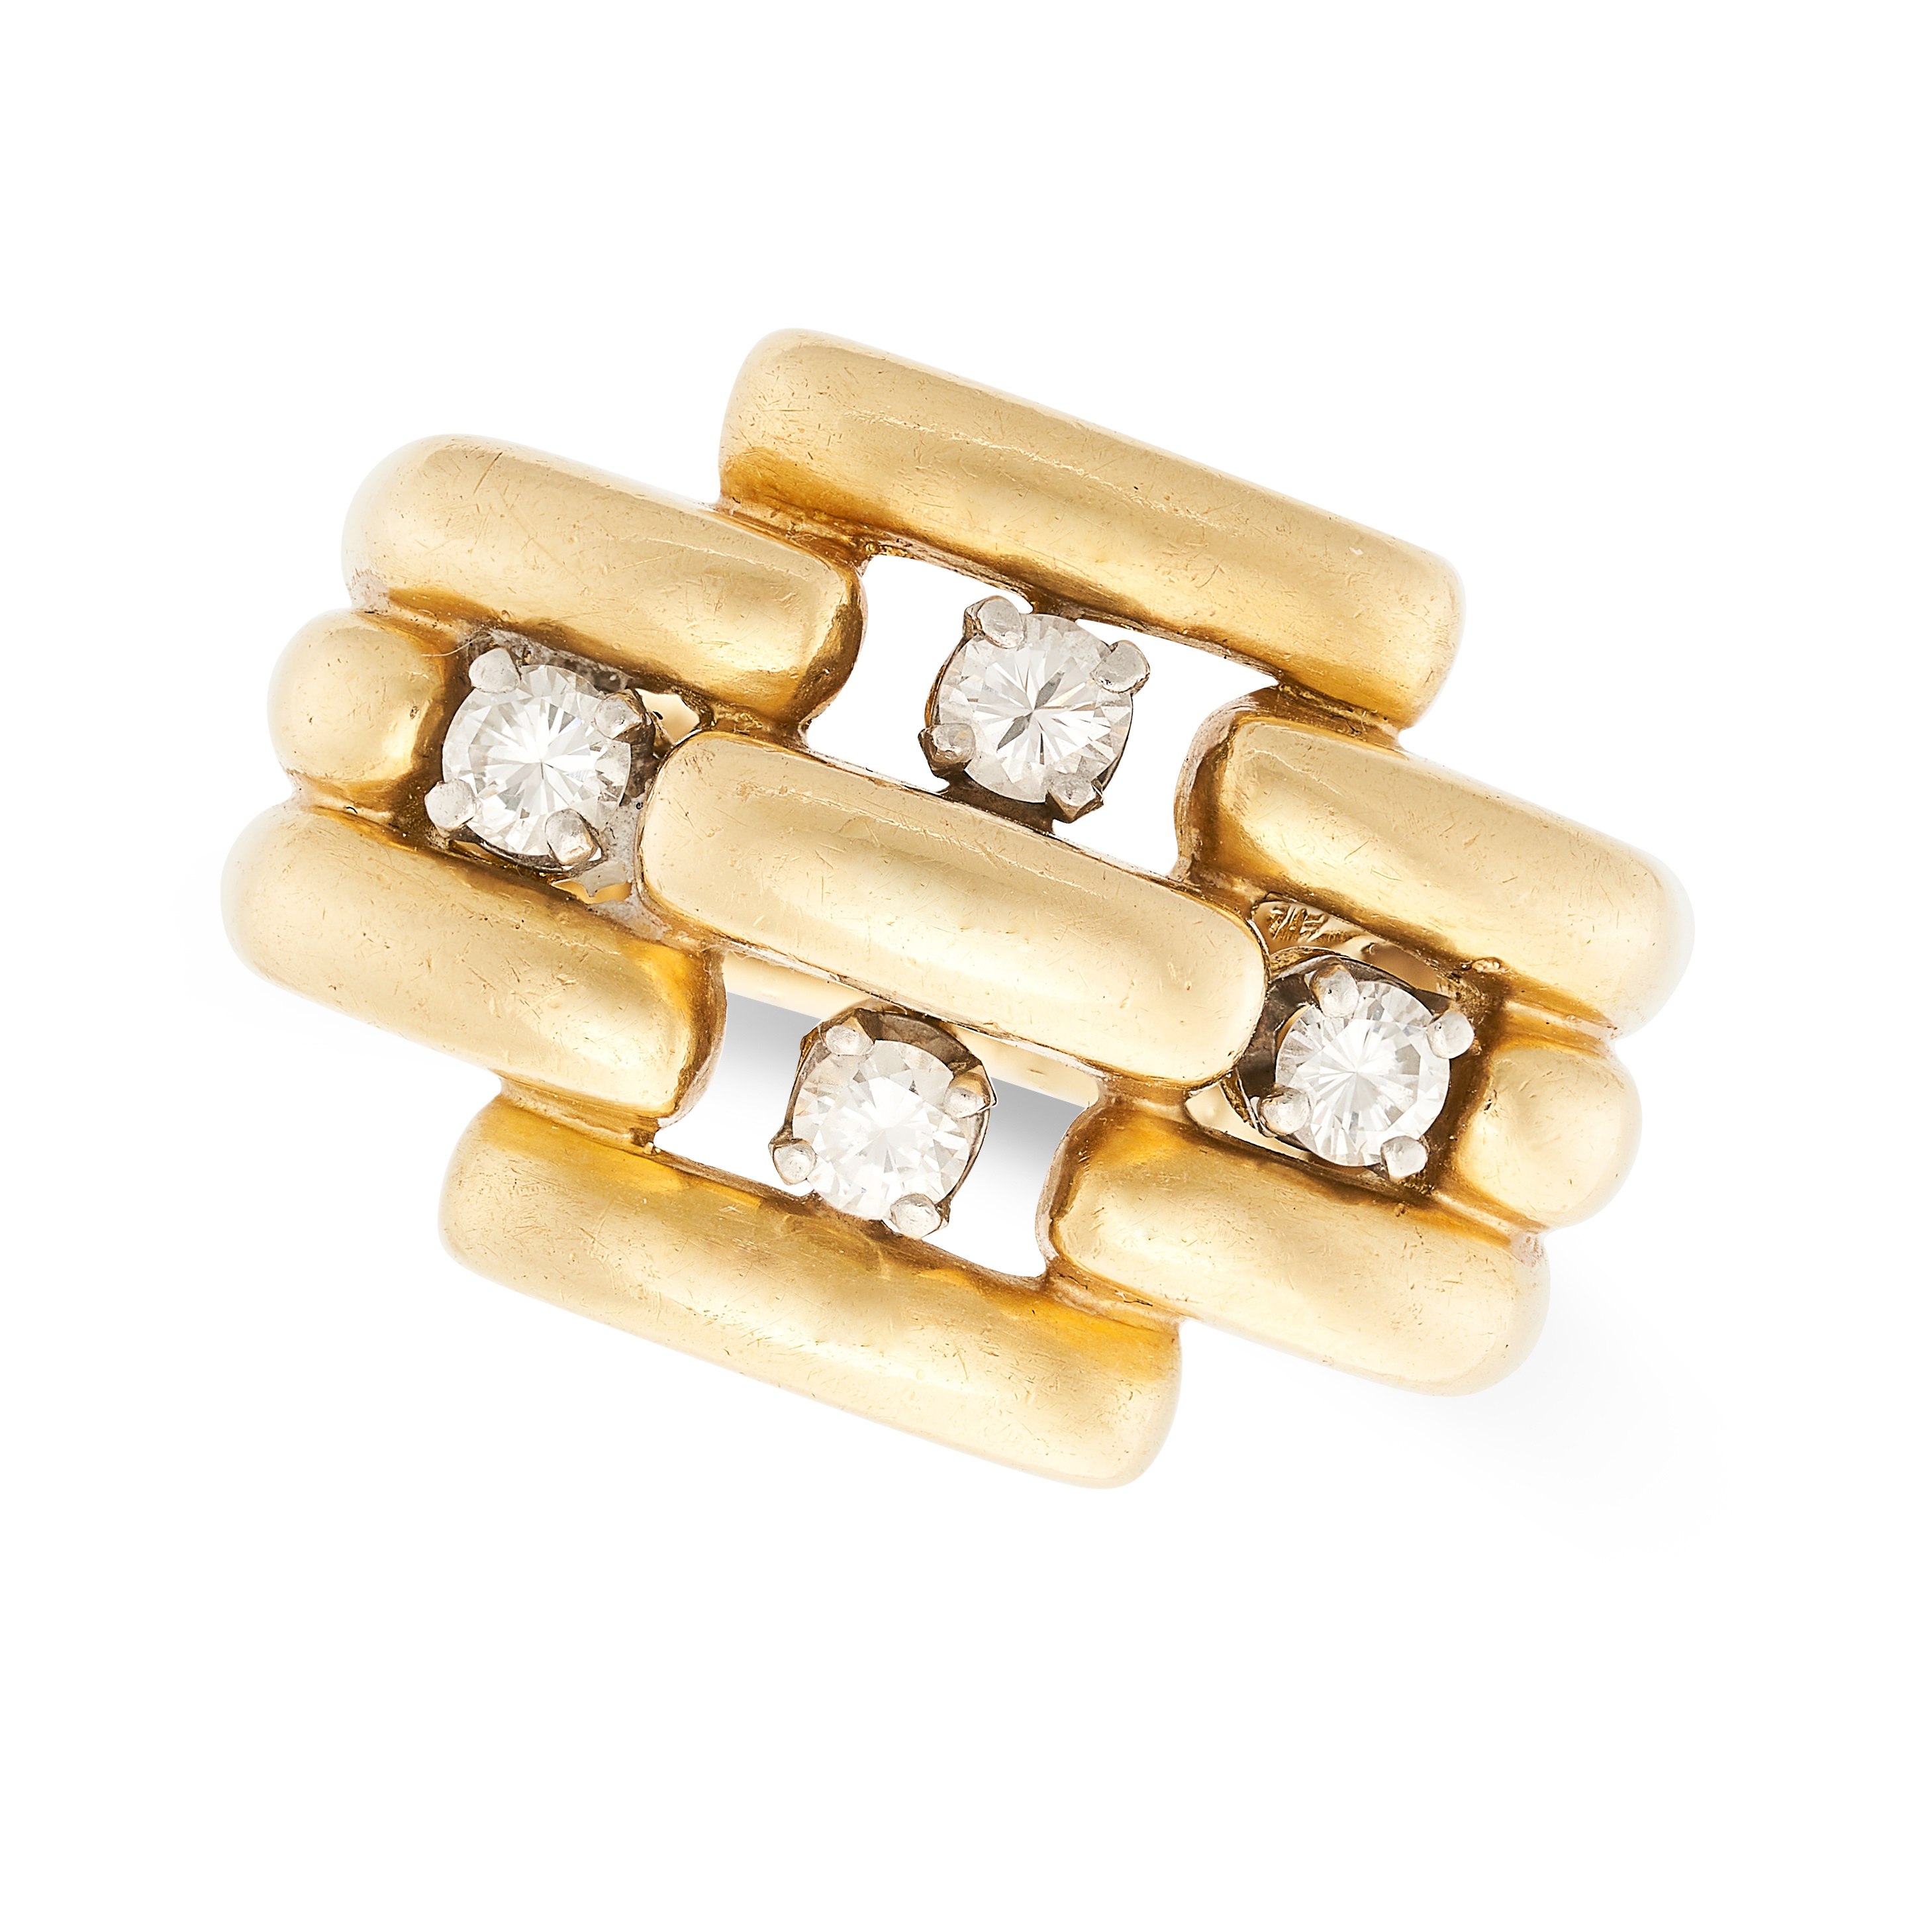 ALDO CIPULLO FOR CARTIER, A VINTAGE DIAMOND DRESS RING, 1971 in 18ct yellow gold, designed as a